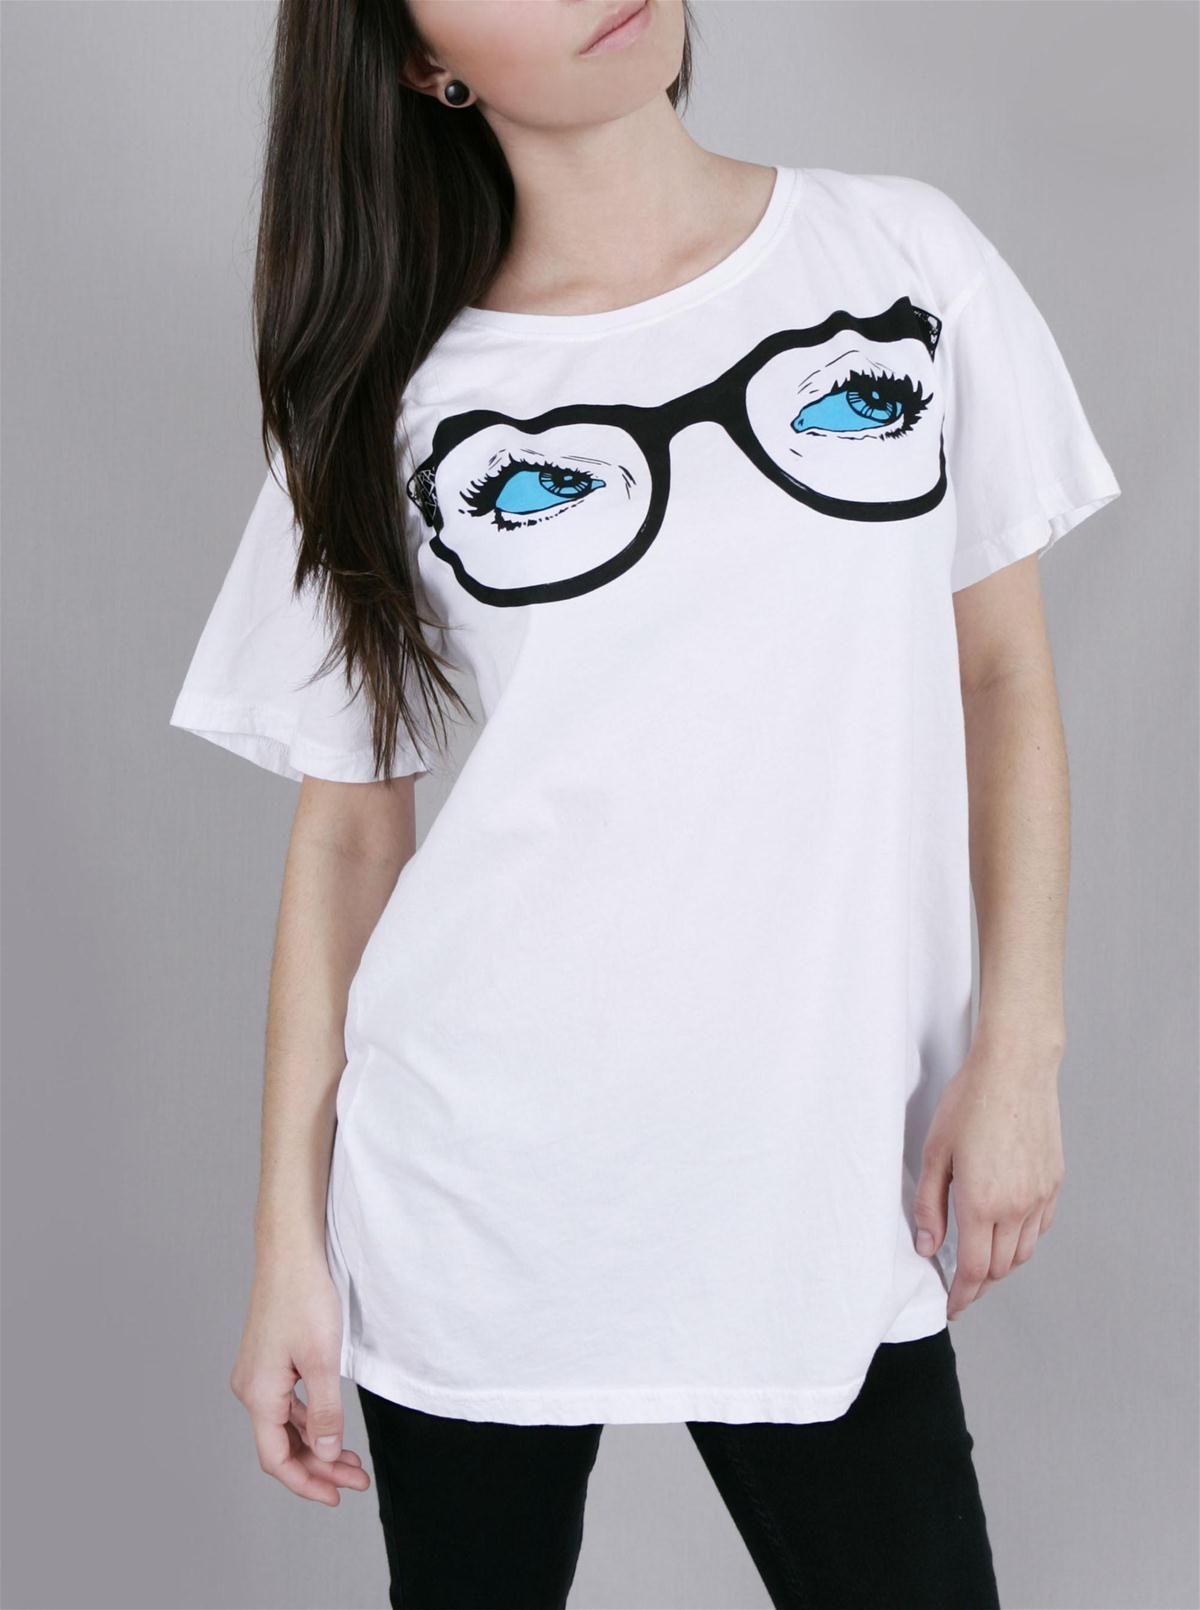 Abbey Dawn Avril Lavigne Peepers Glasses Oversized T Shirt Tee Top 